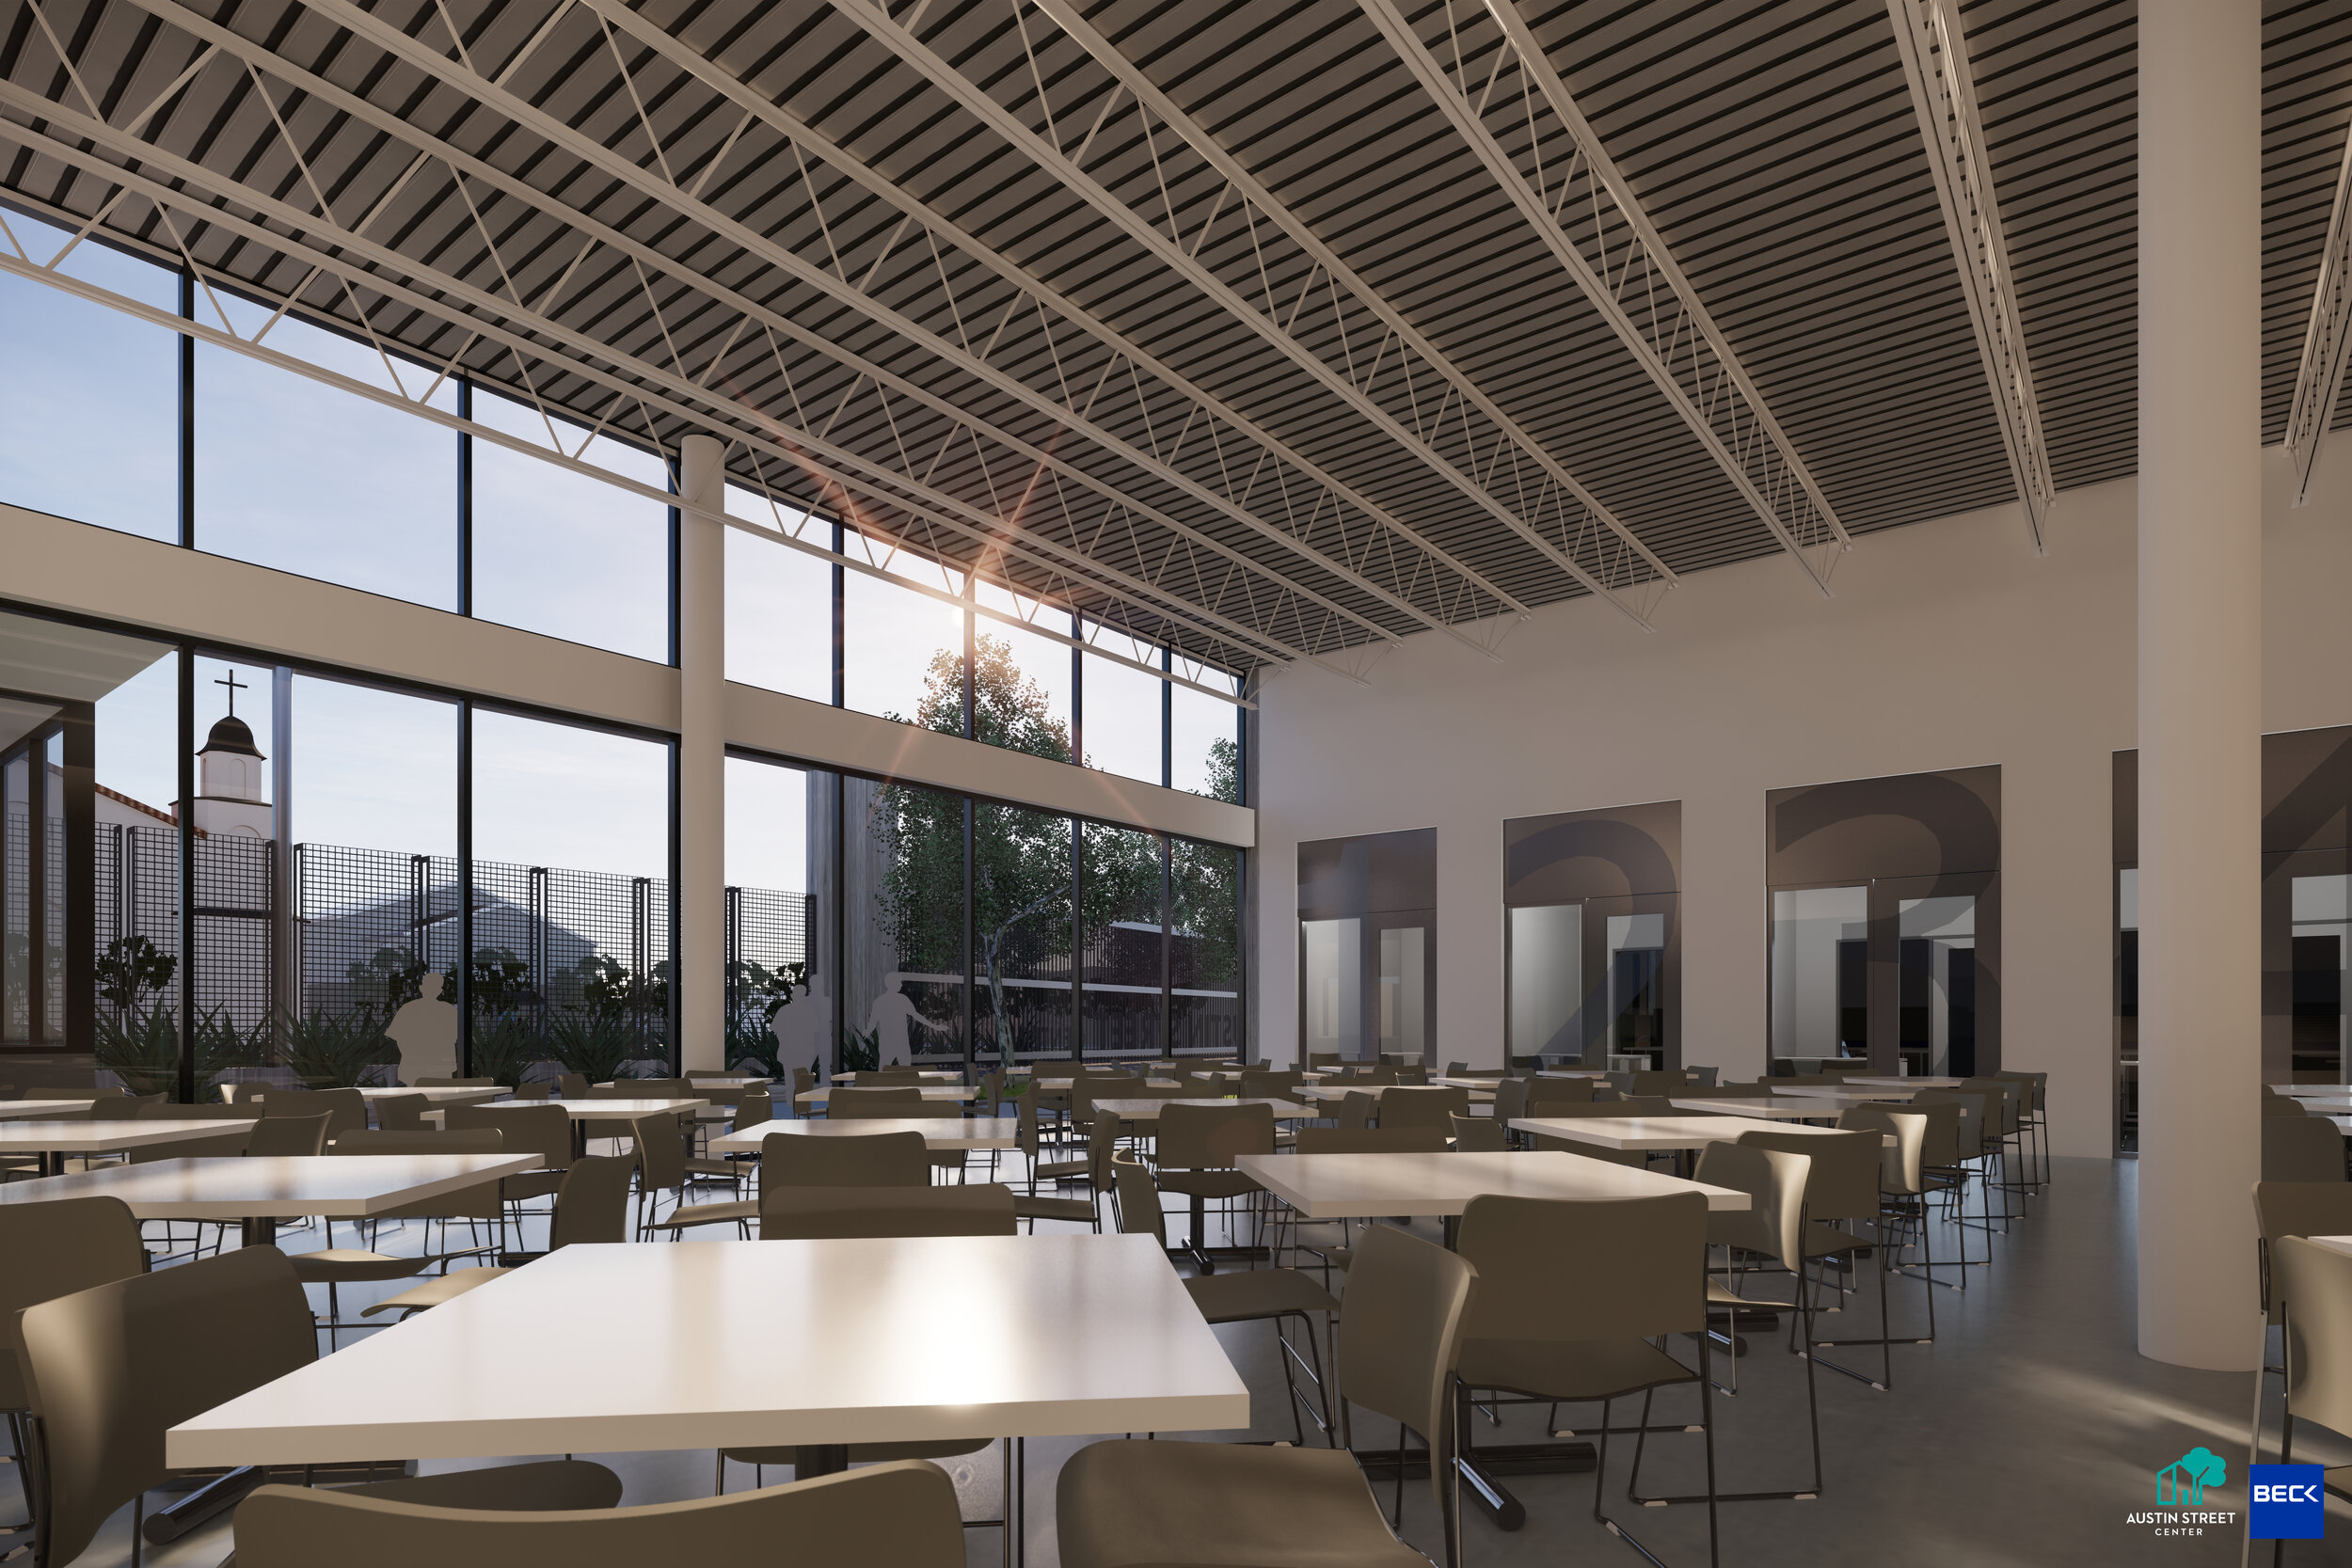 The proposed interior design for the new Austin Street Community Engagement Center dining room.